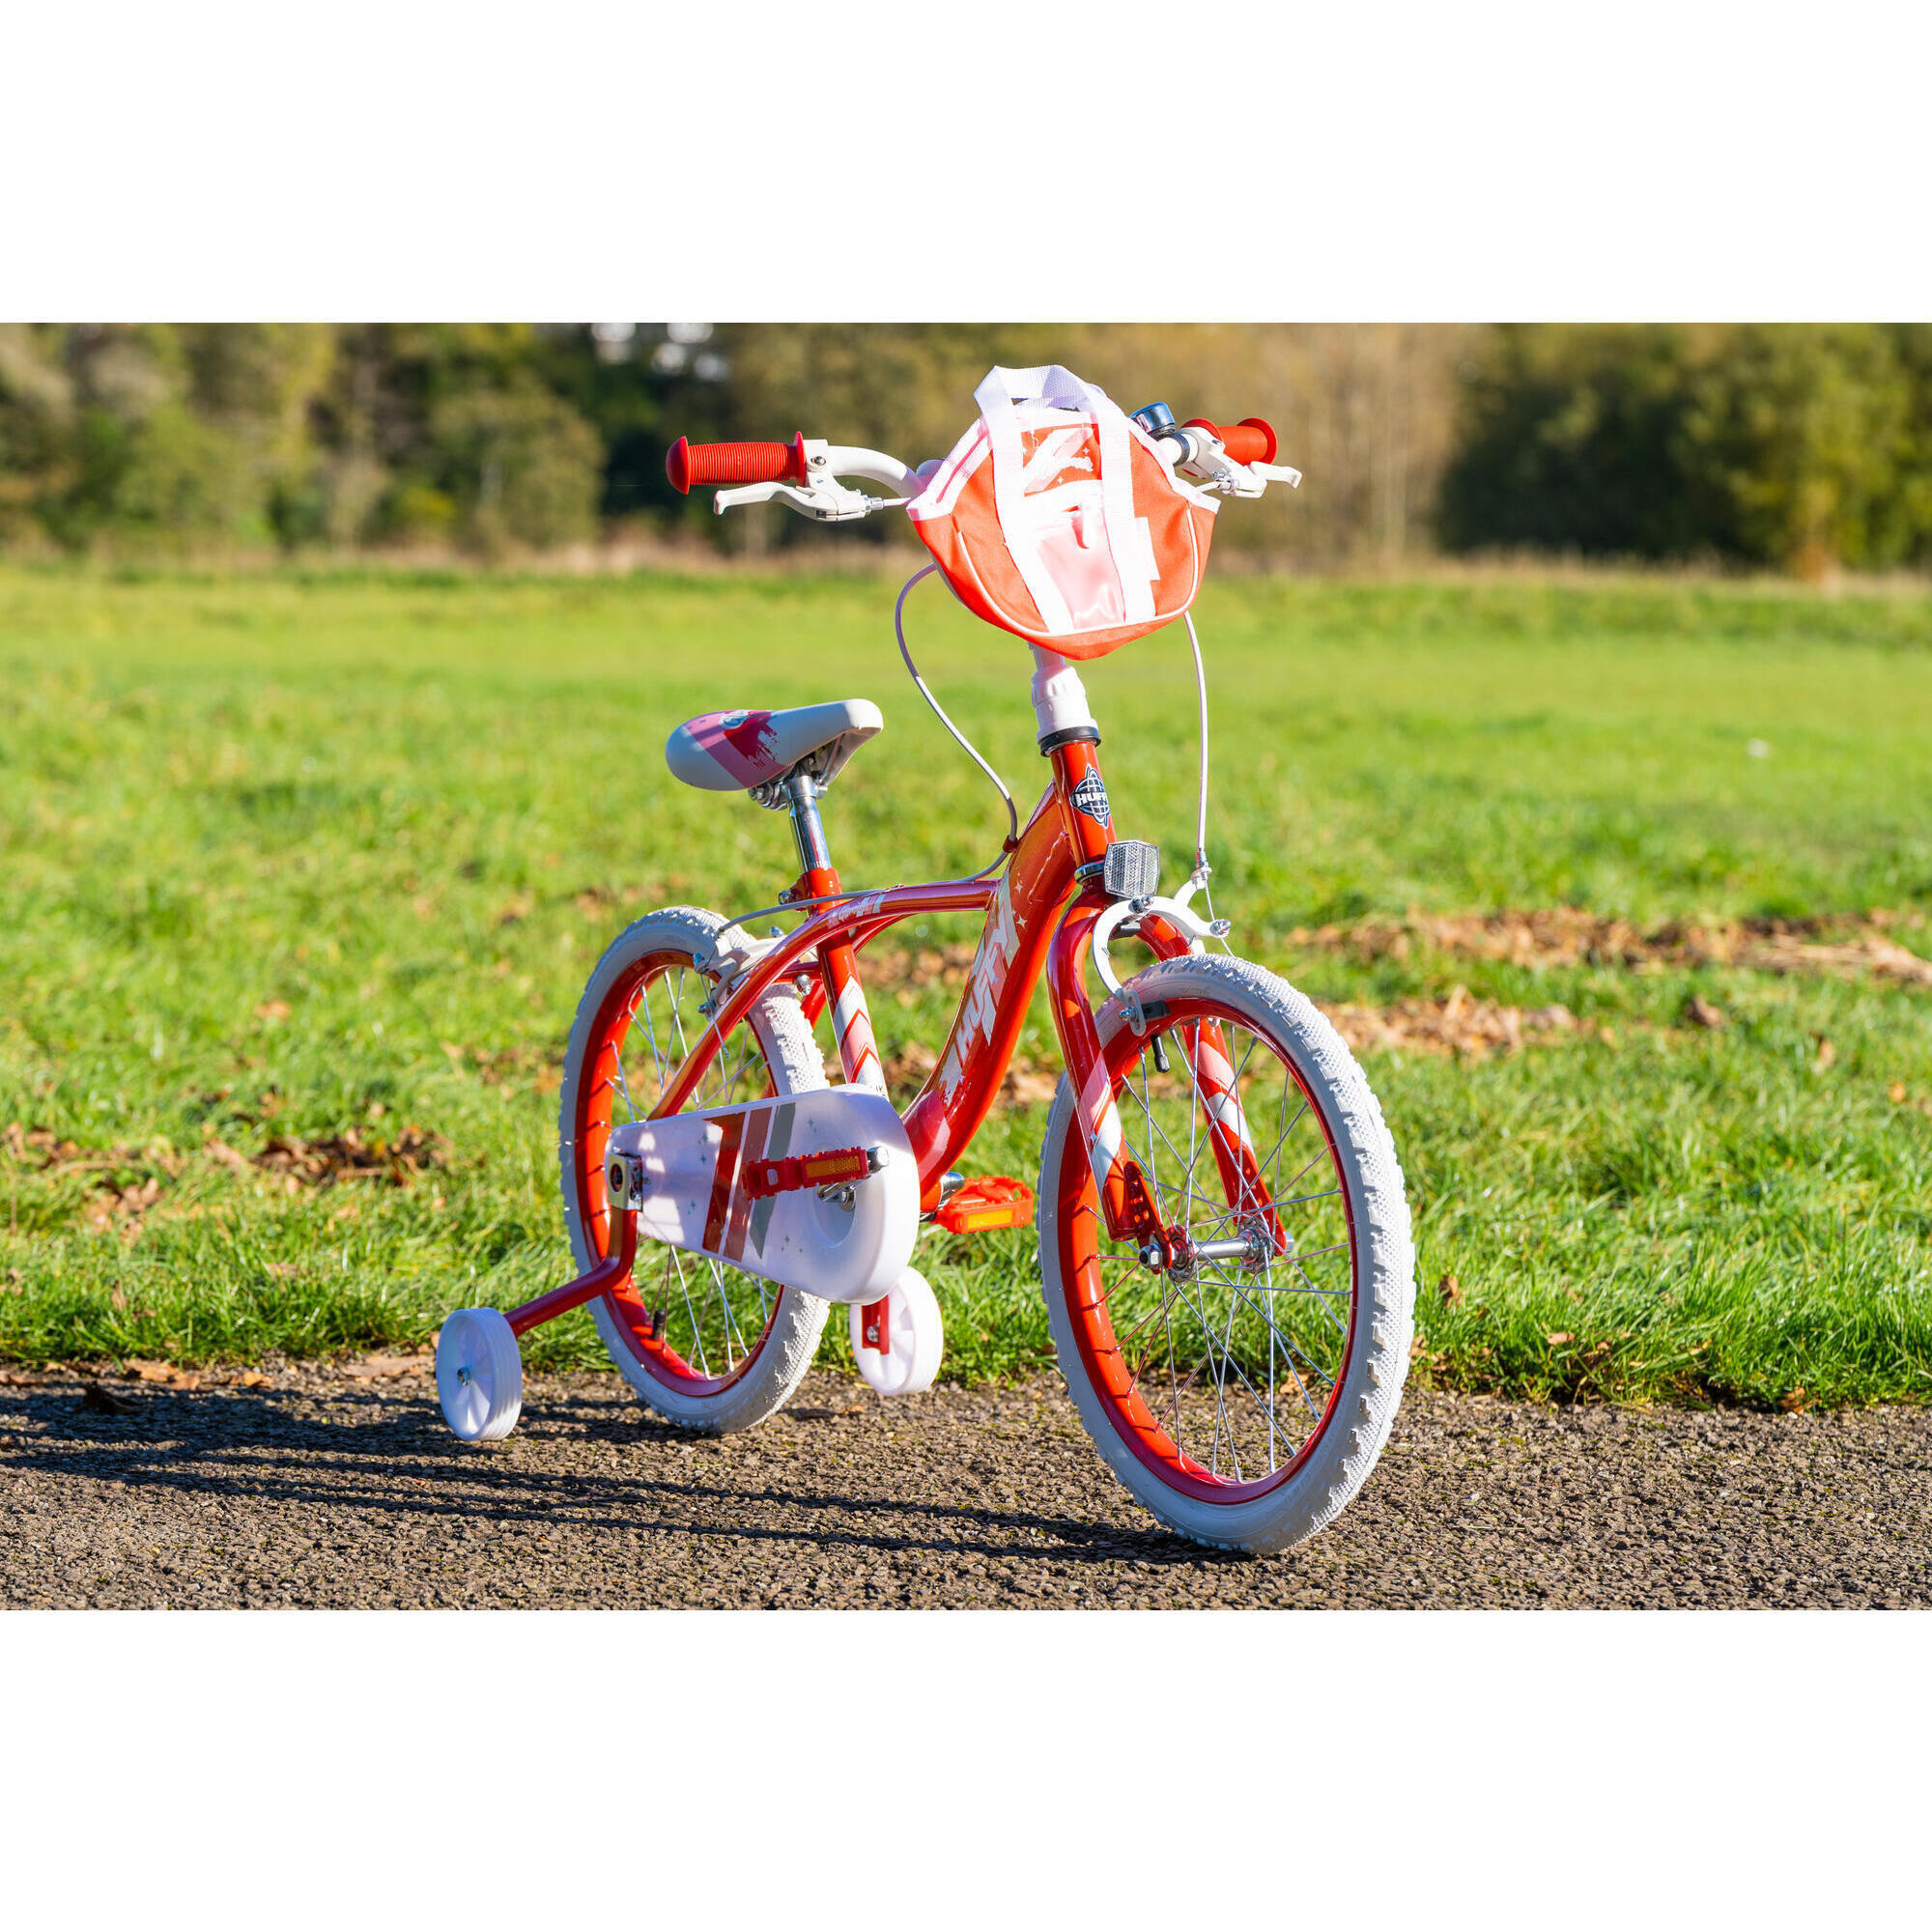 Huffy Glimmer 18" Girls Bike Red 5-7yrs Quick Connect + Stabilisers 4/7